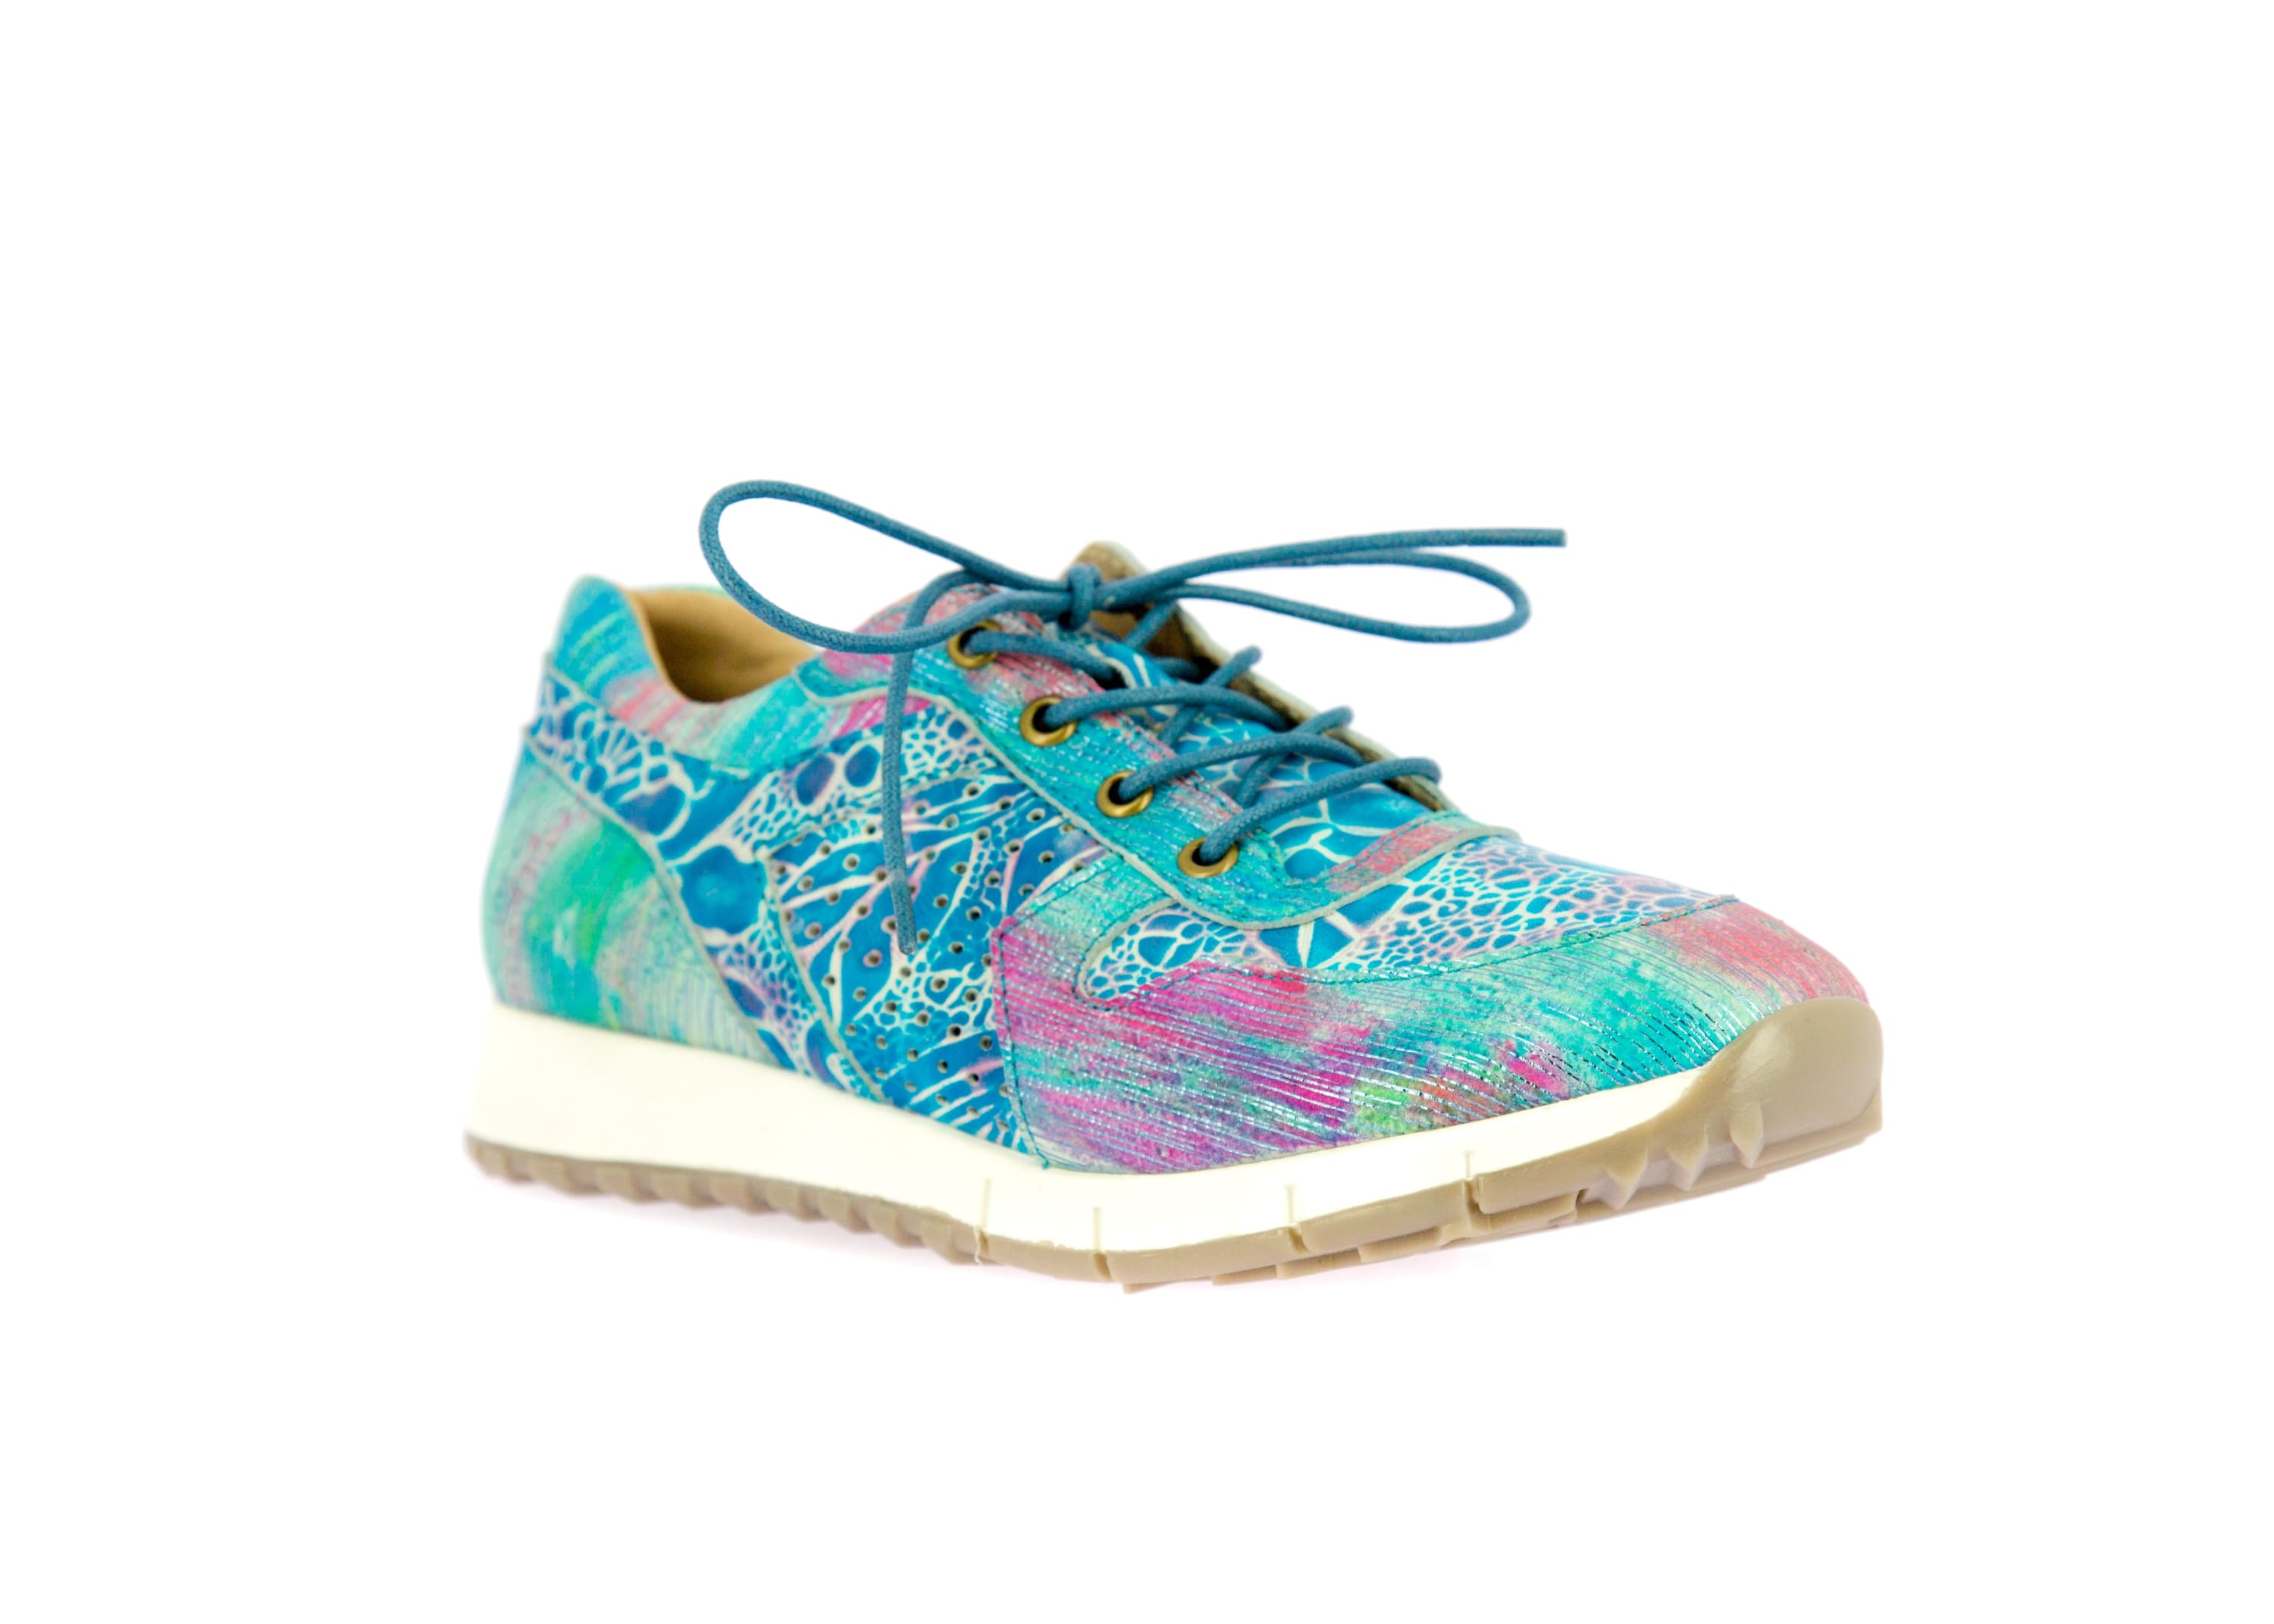 Chaussures DEPART 05 - 37 / Turquoise - Sport